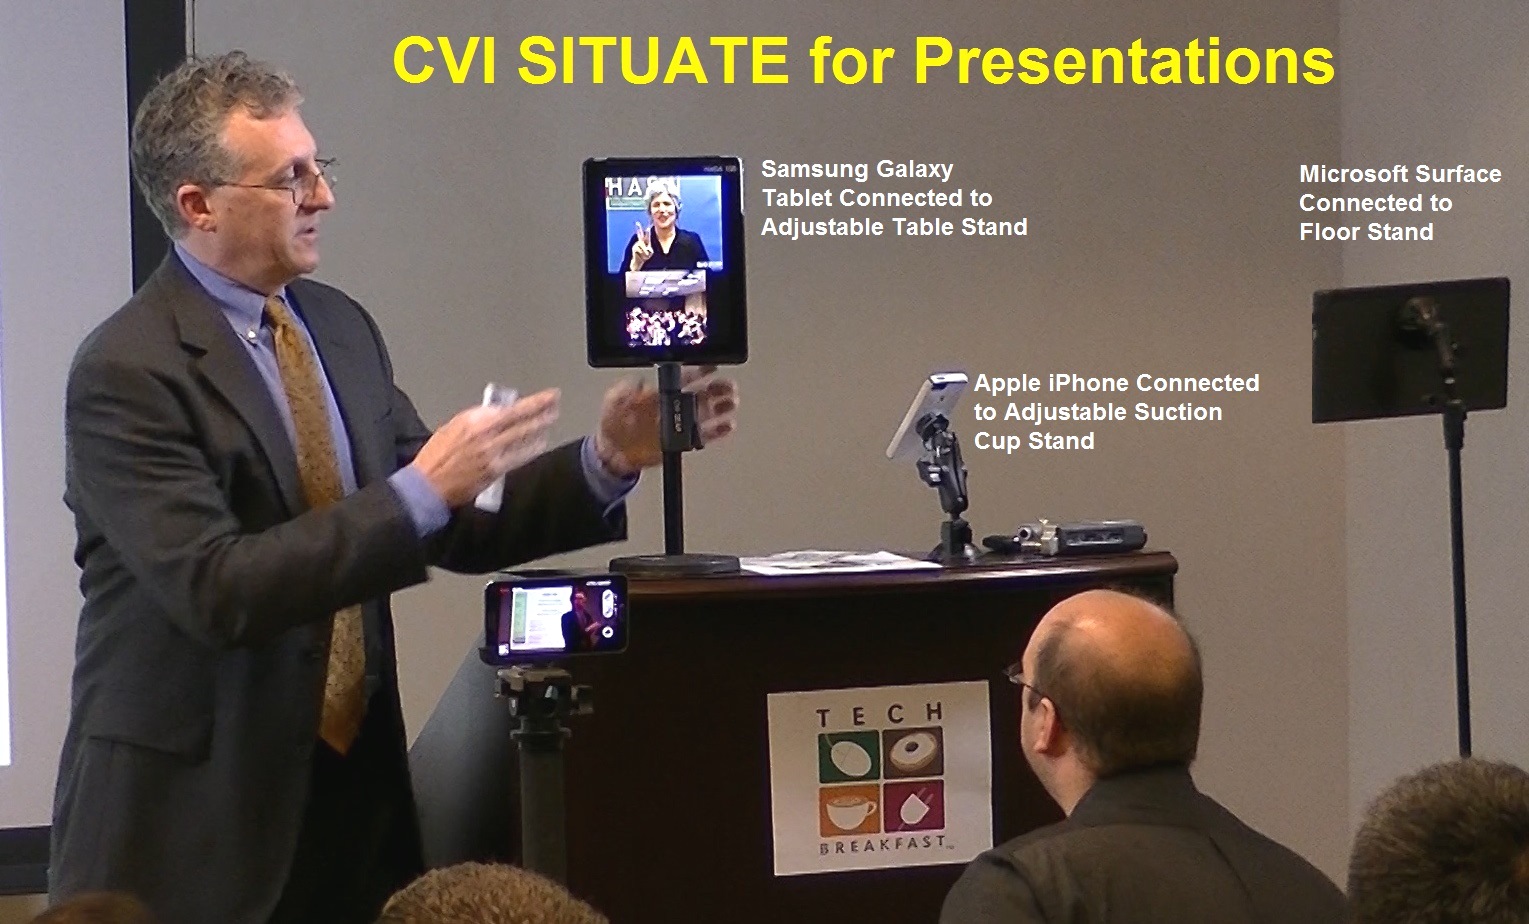 CVI SITUATE for Presentations; Presenter using stands for iPad, iPhone and Surface at the Tech Breakfast